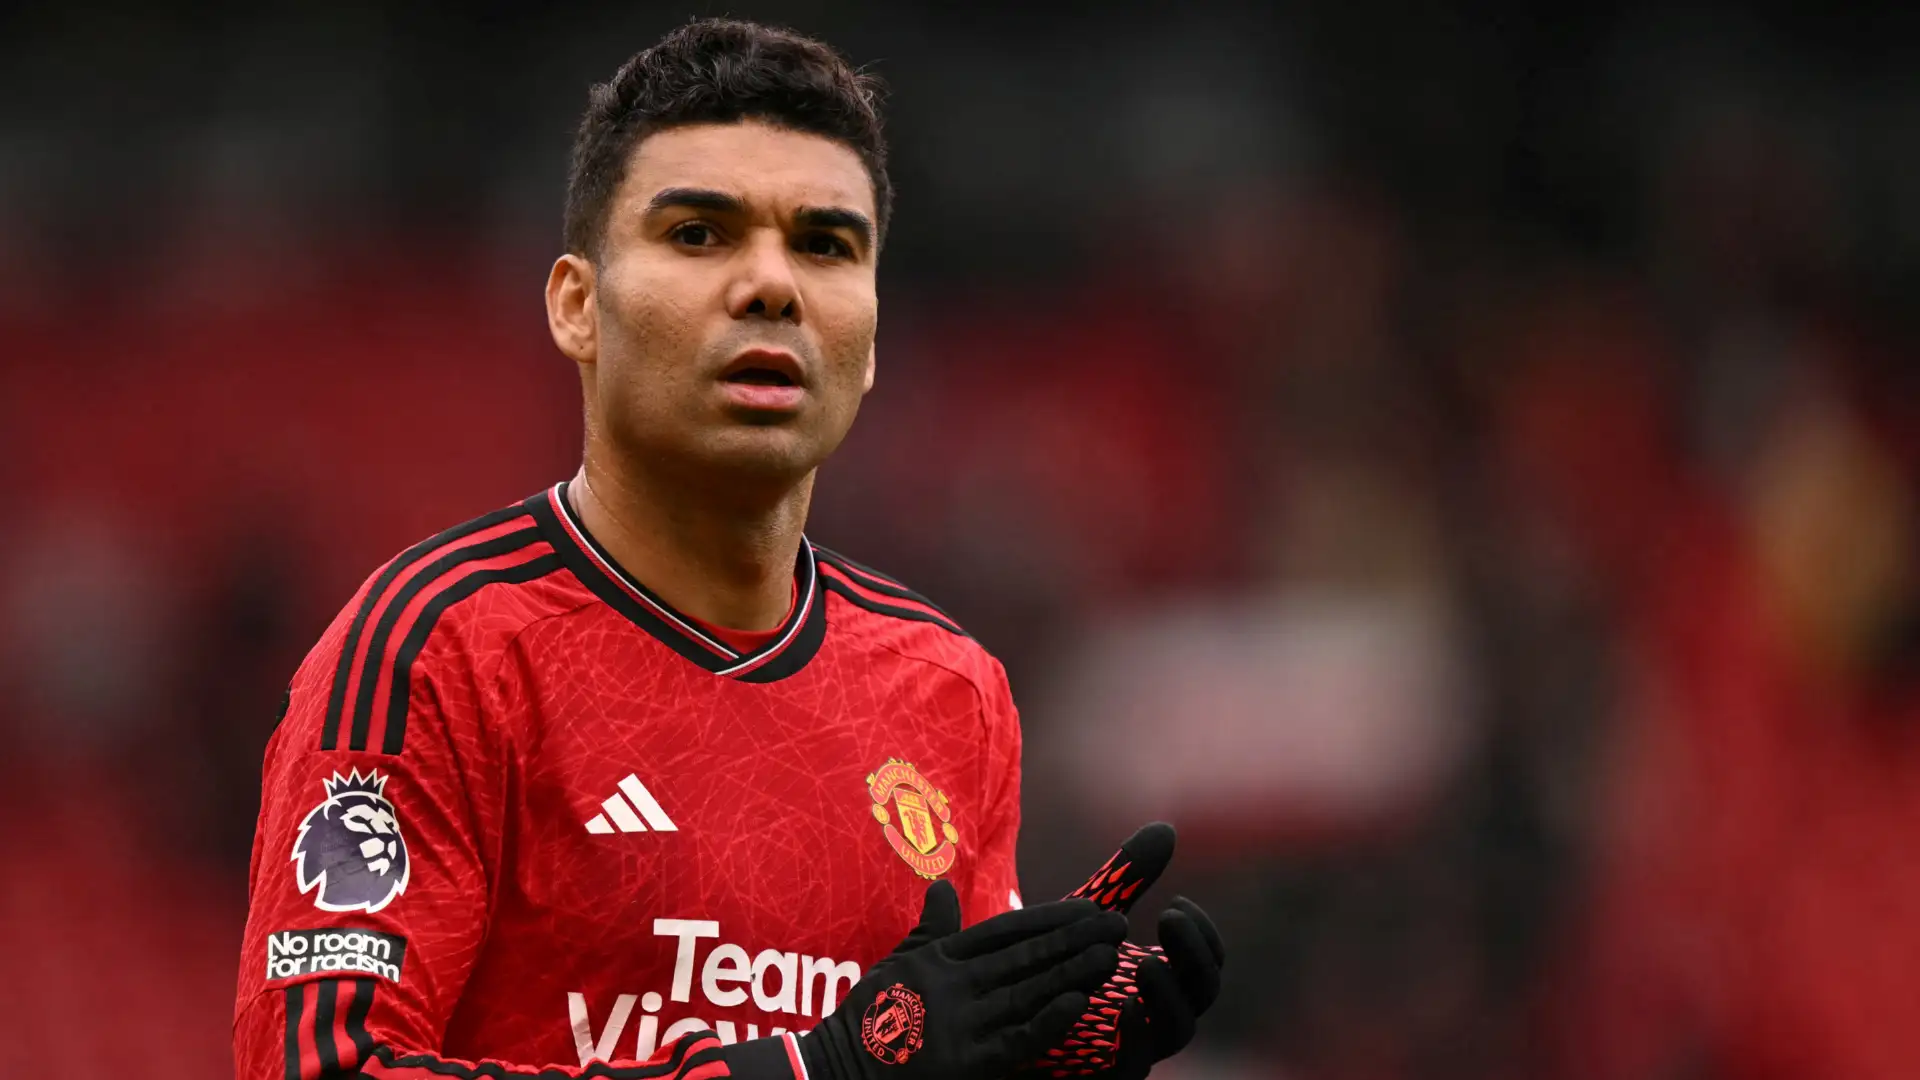 'Disrespectful!' - Casemiro snaps as he delivers angry message to critics - including Jamie Carragher - who claim Man Utd midfielder should retire